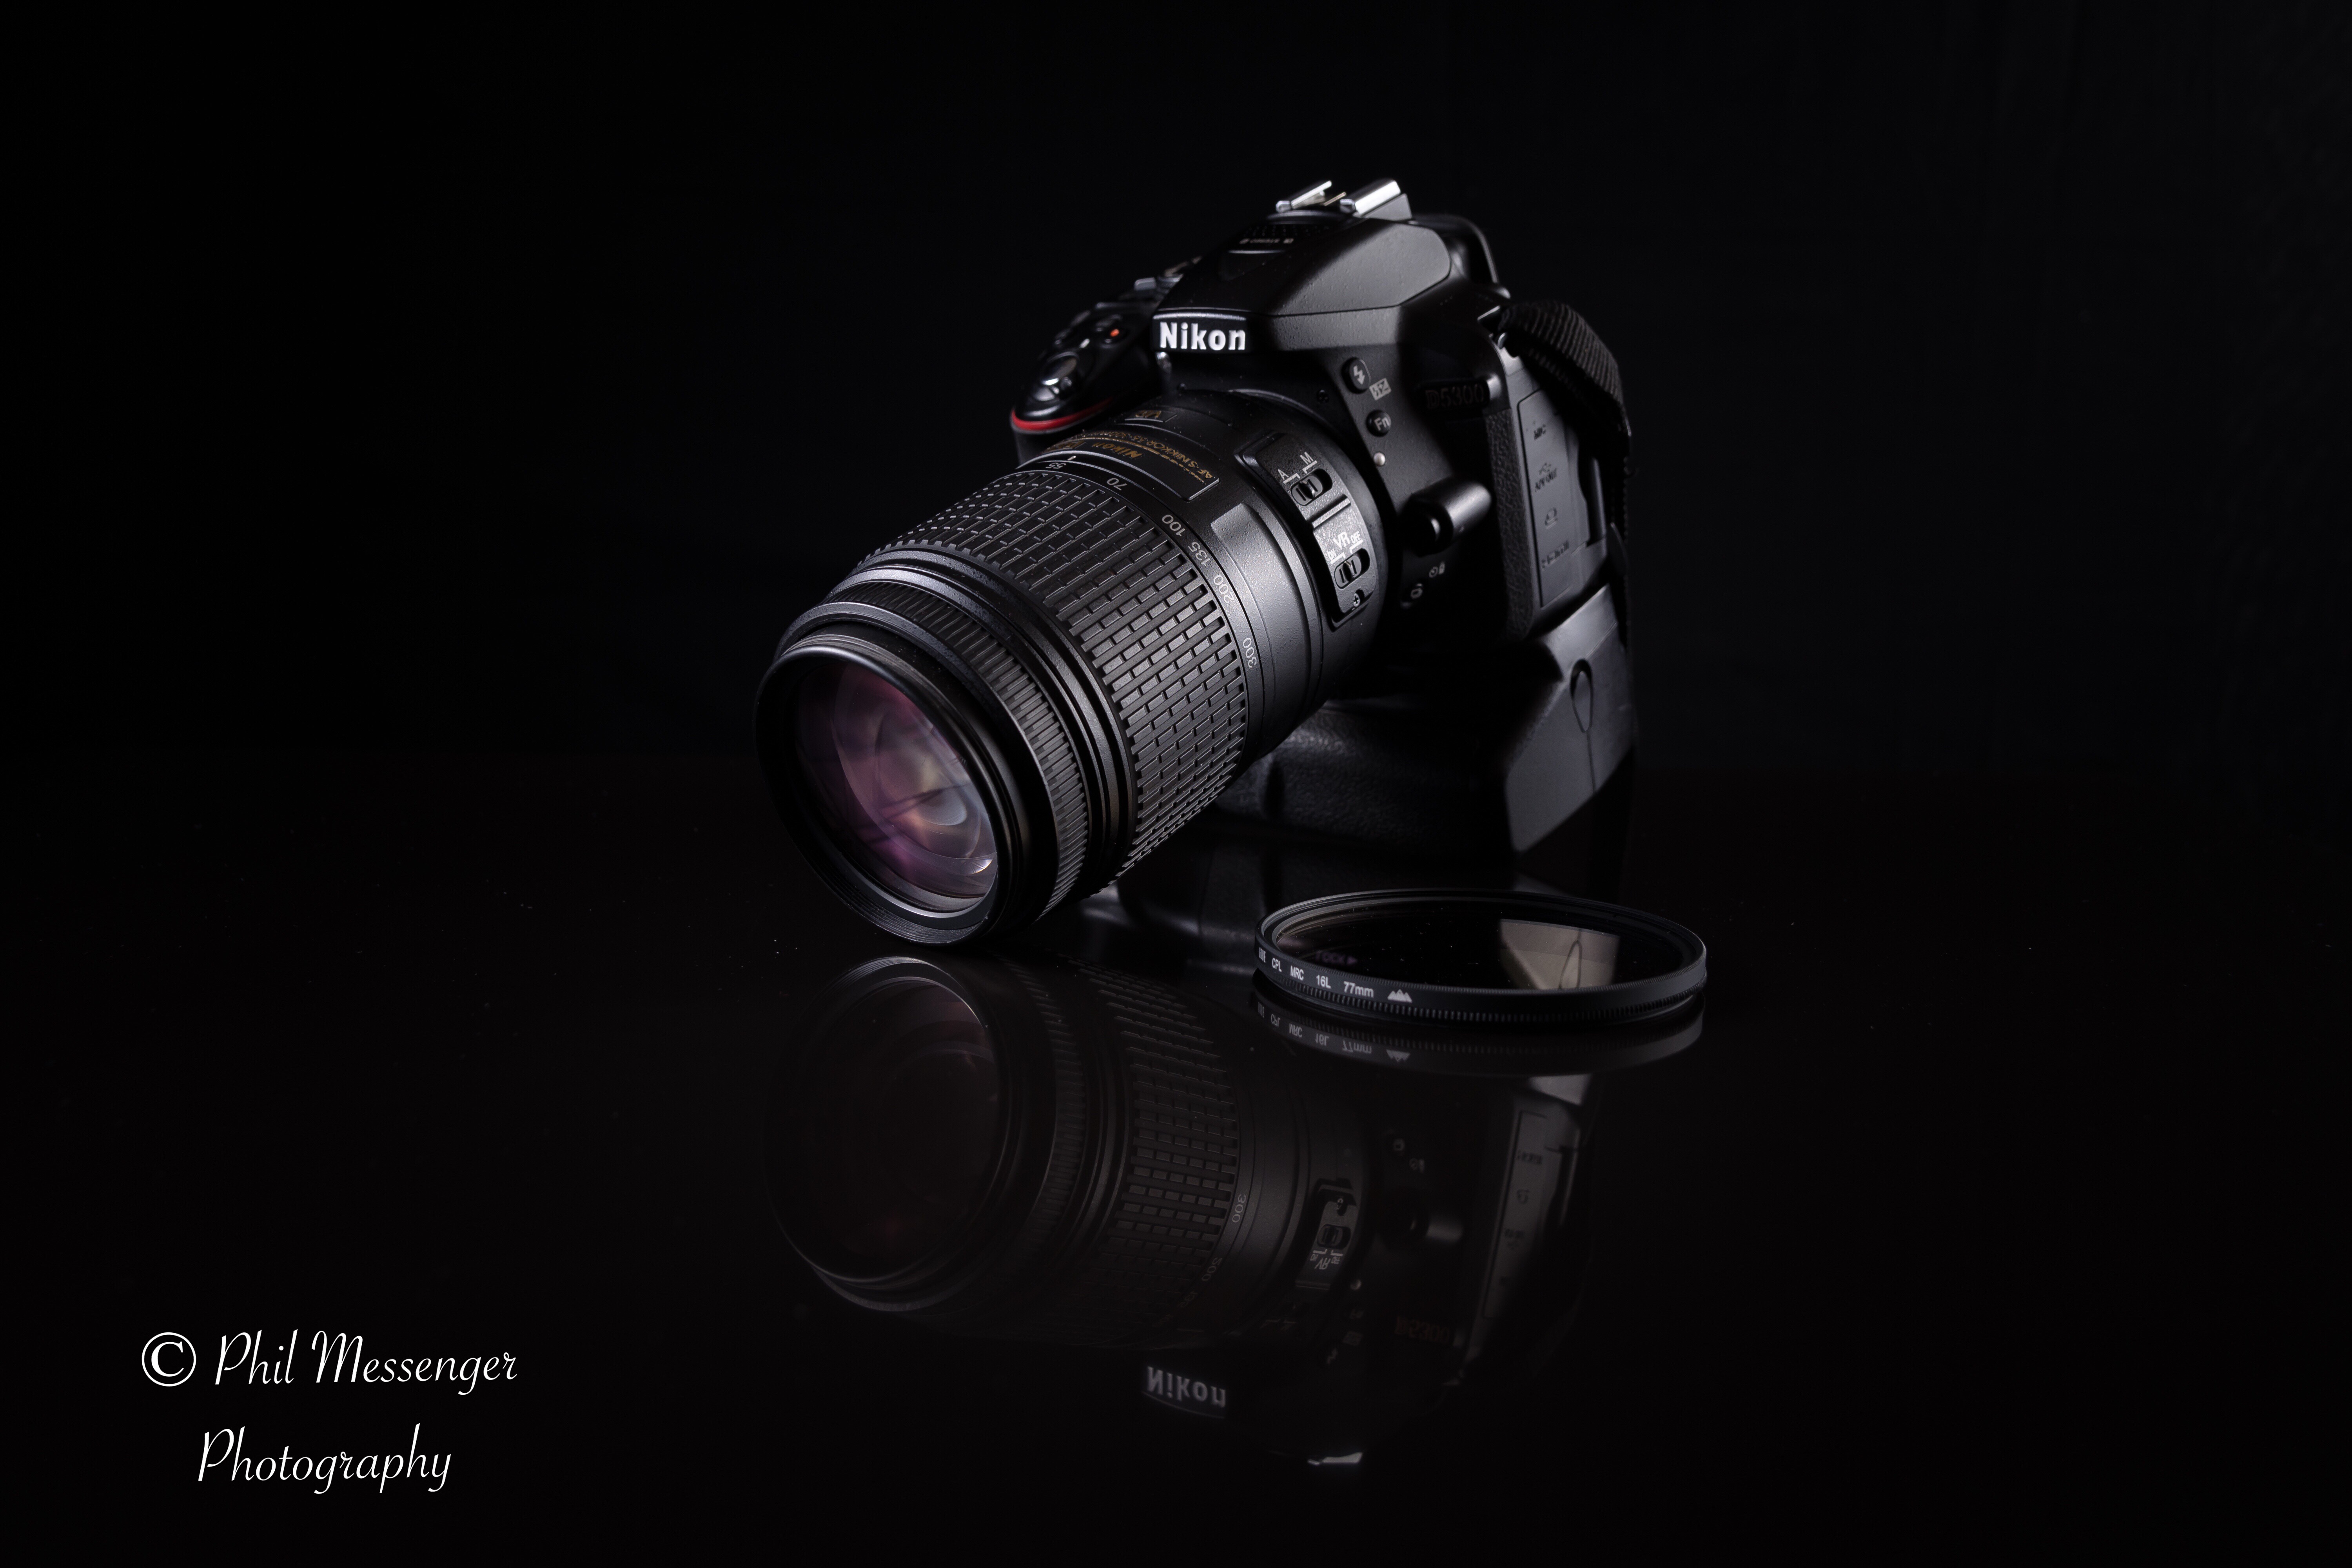 Photographing my Nikon D5300 with my Nikon D5200 on a black background.